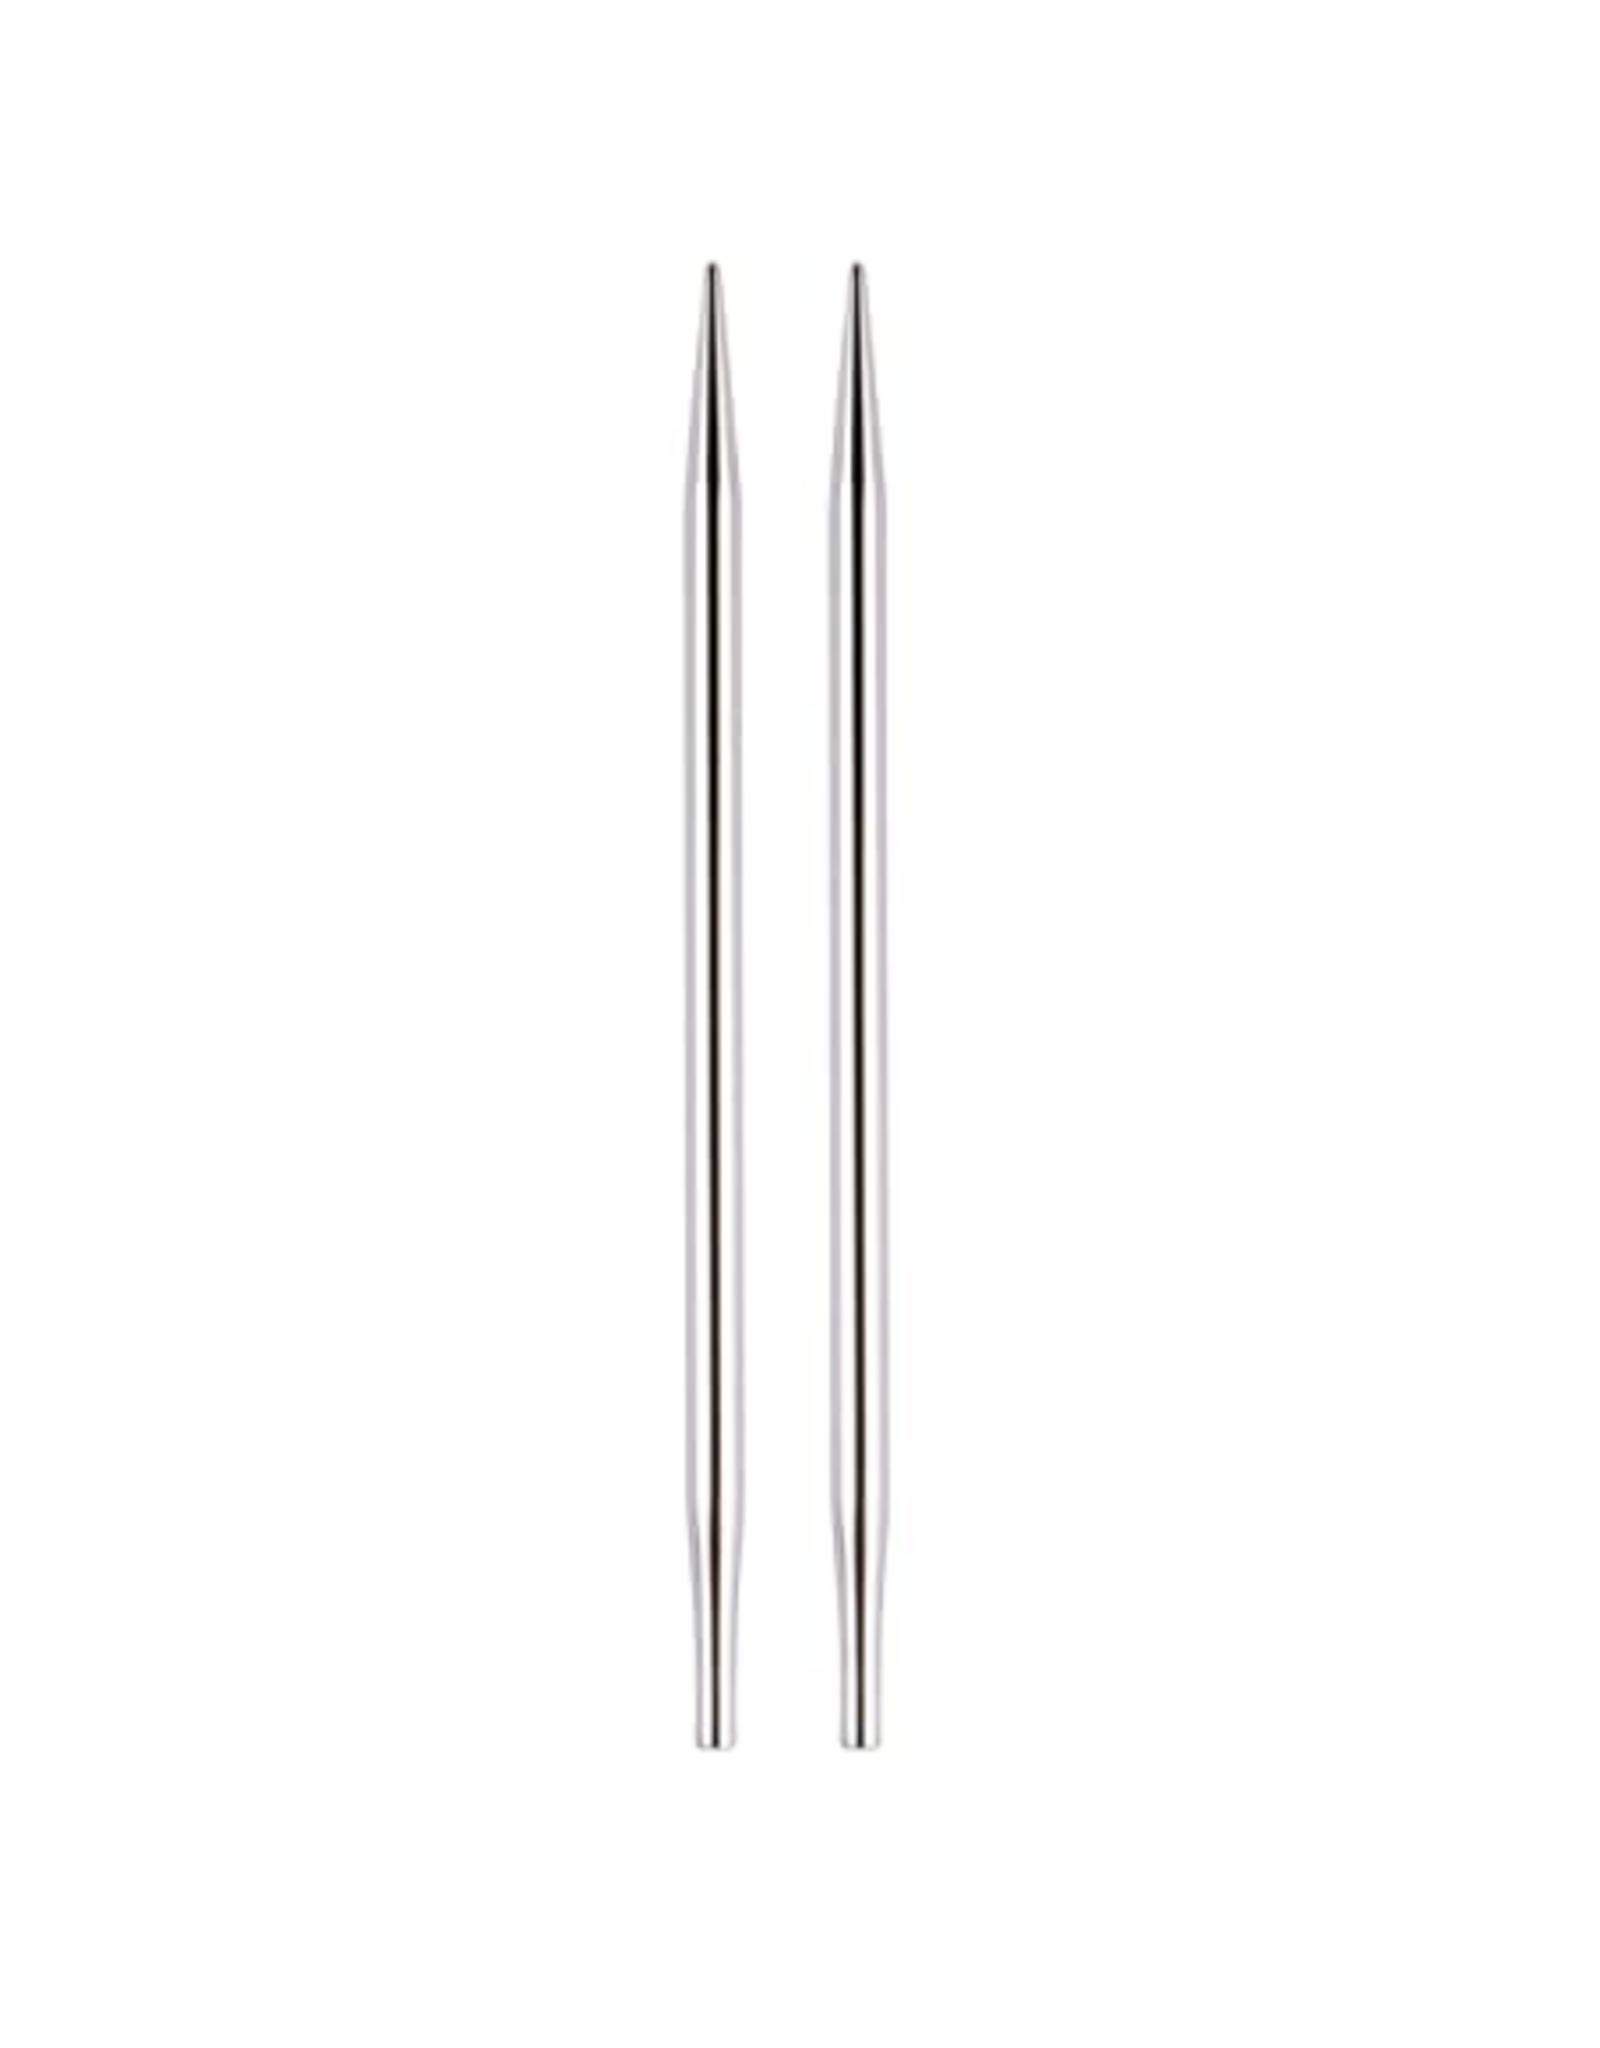 Nova size US 17 interchangeable needle tips for 24" cords and up.